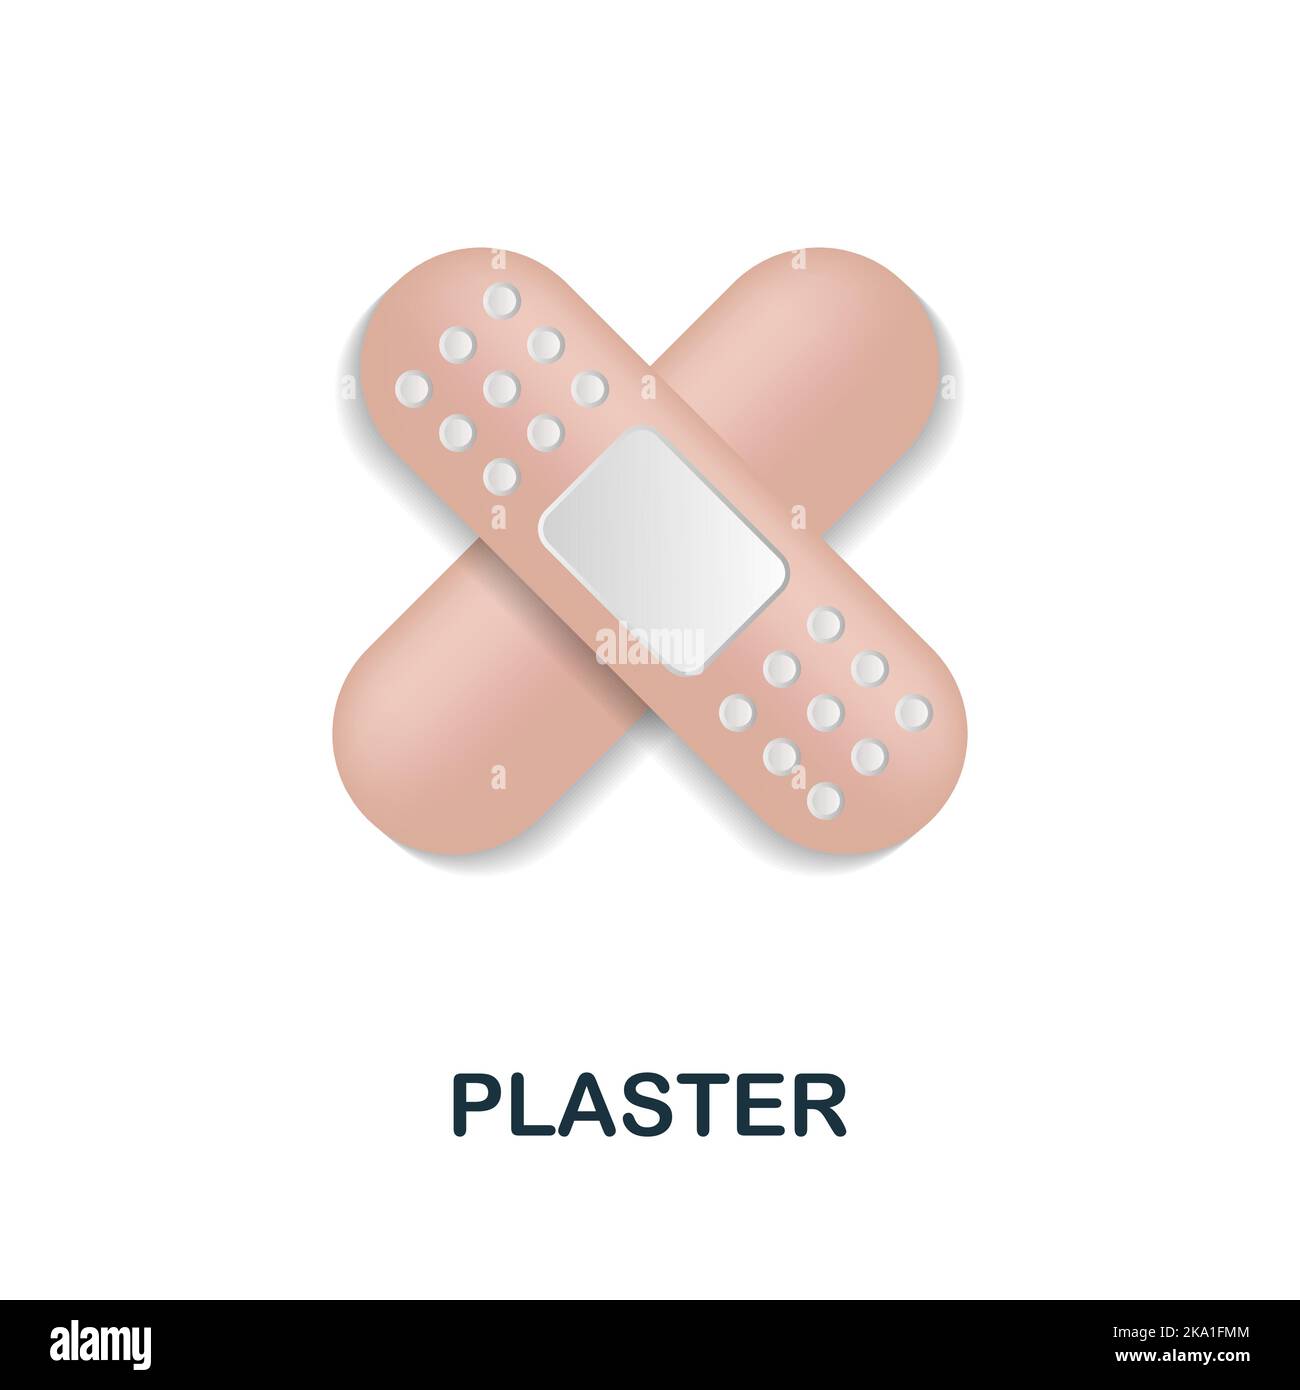 Plaster icon. 3d illustration from medicine collection. Creative Plaster 3d icon for web design, templates, infographics and more Stock Vector